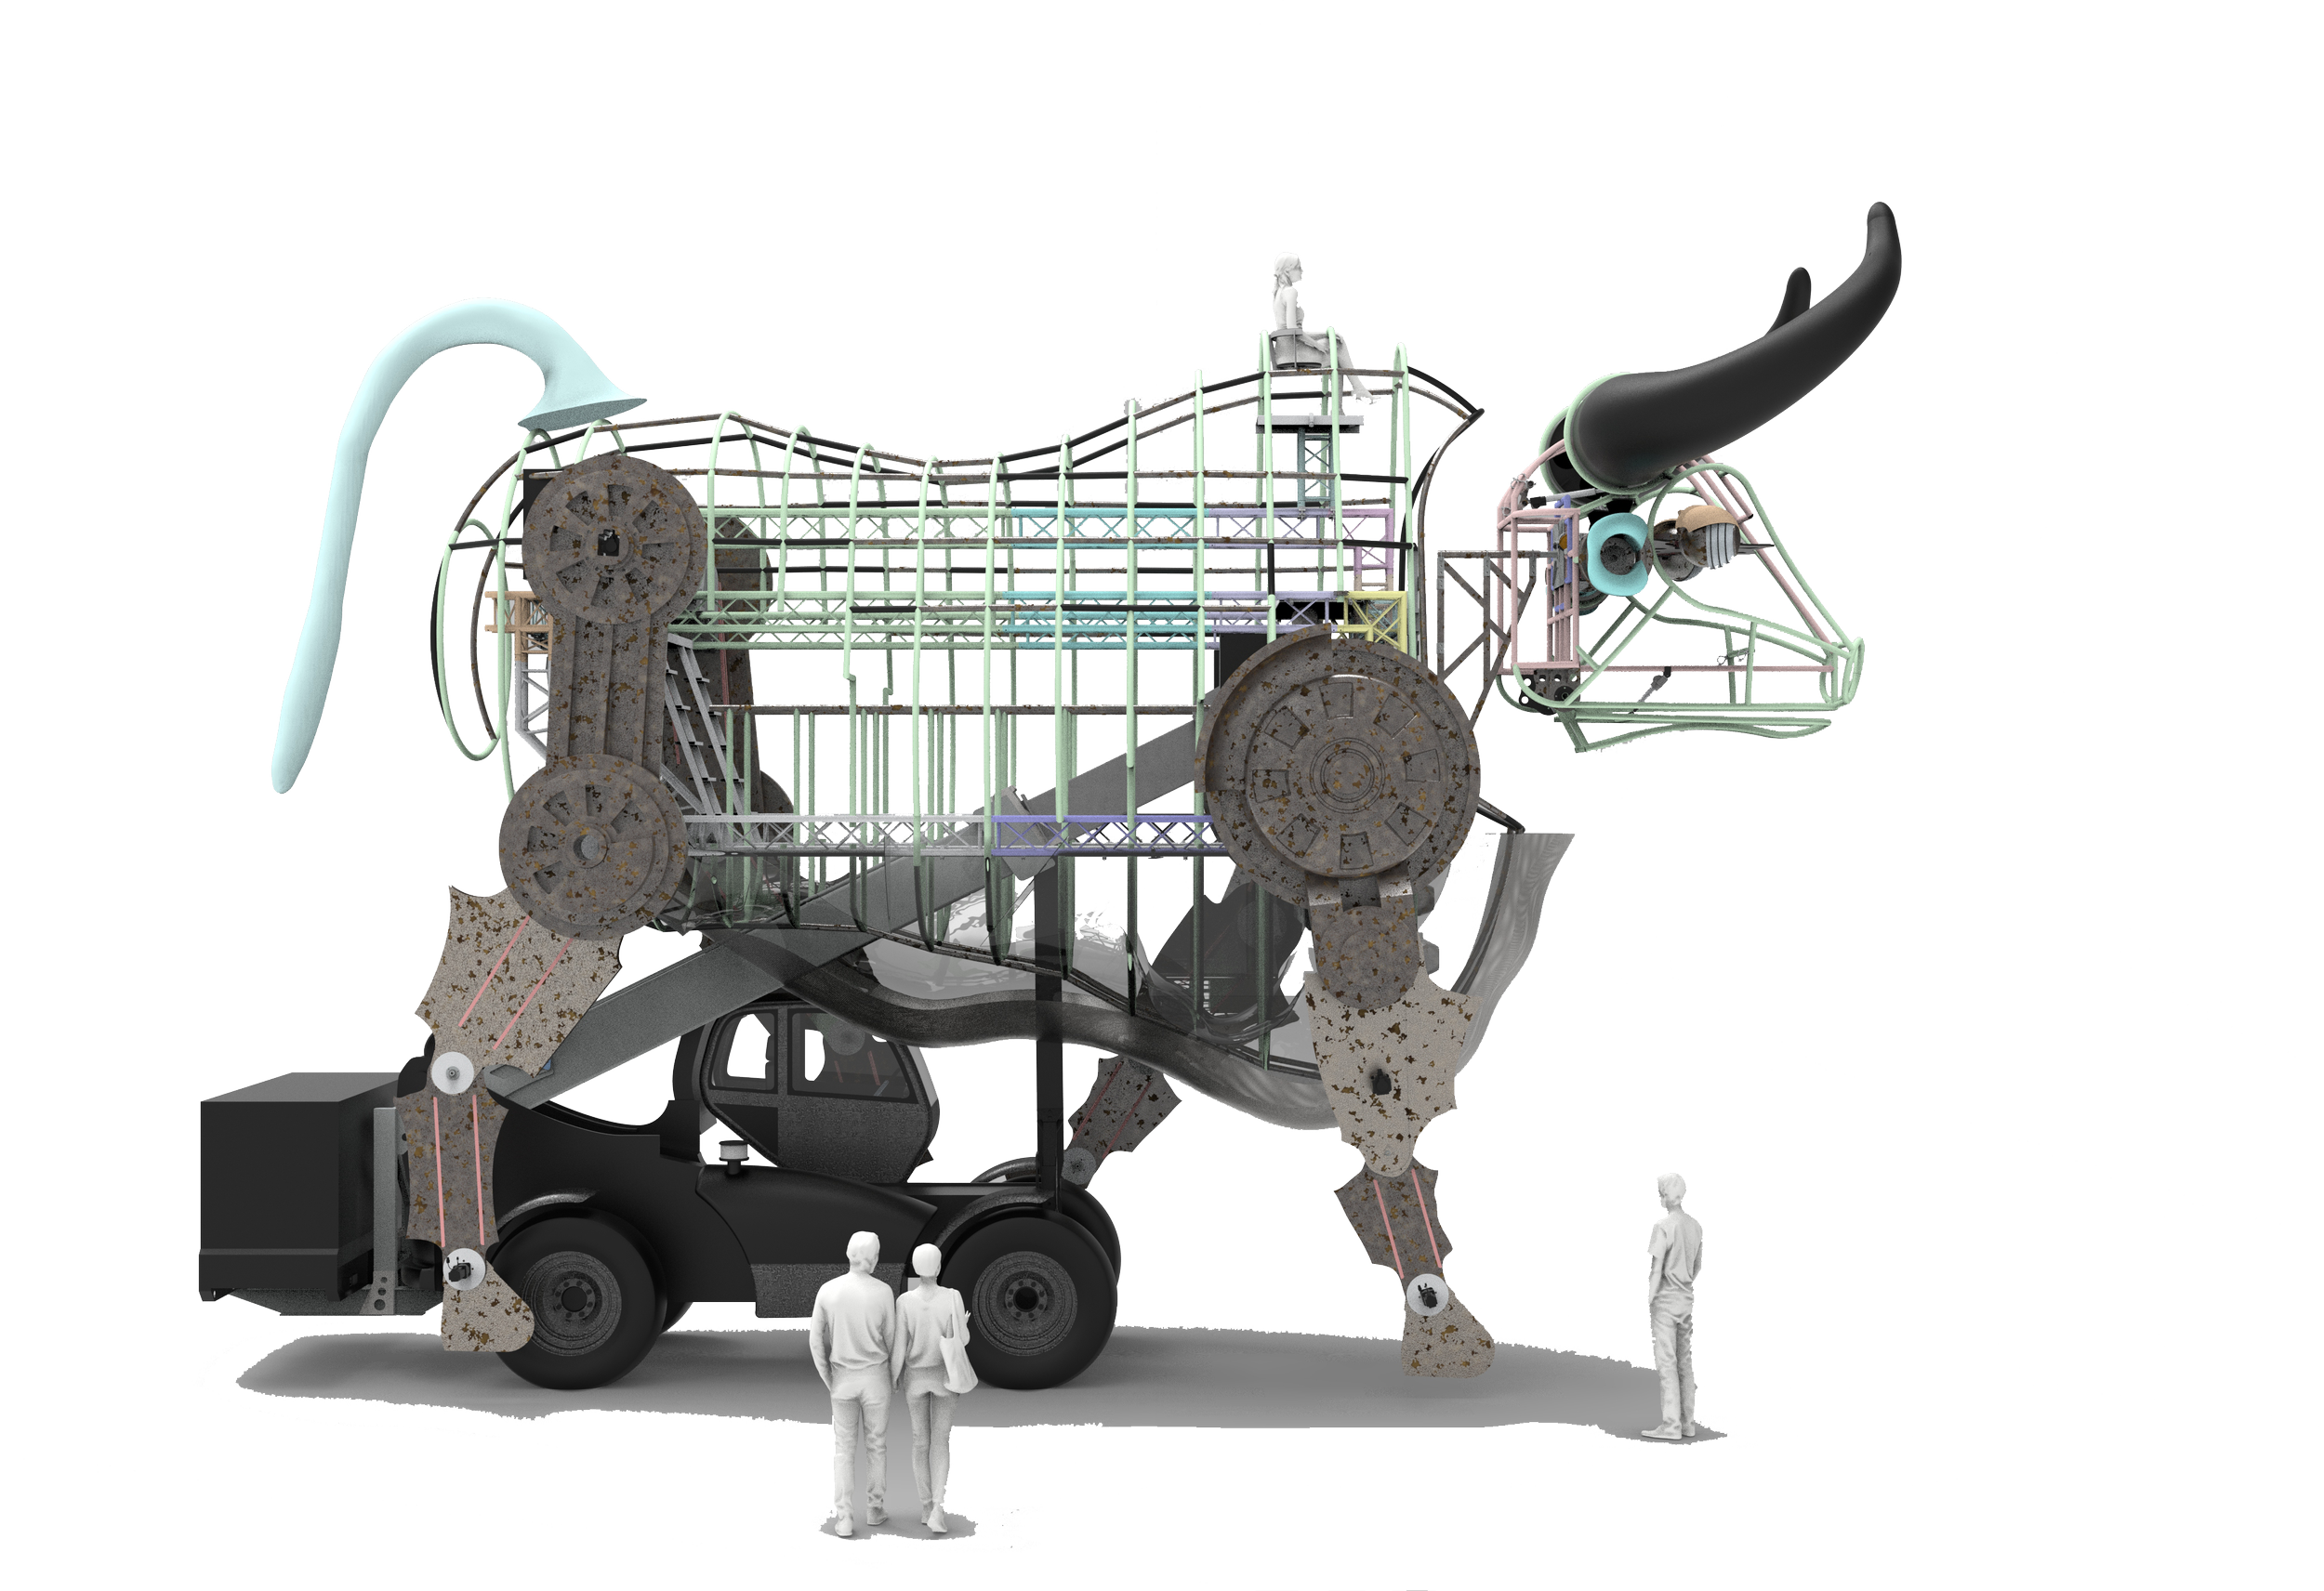 Some_Design_Engineering_Giant_Bull_Animatronic_Rendering_Side_View